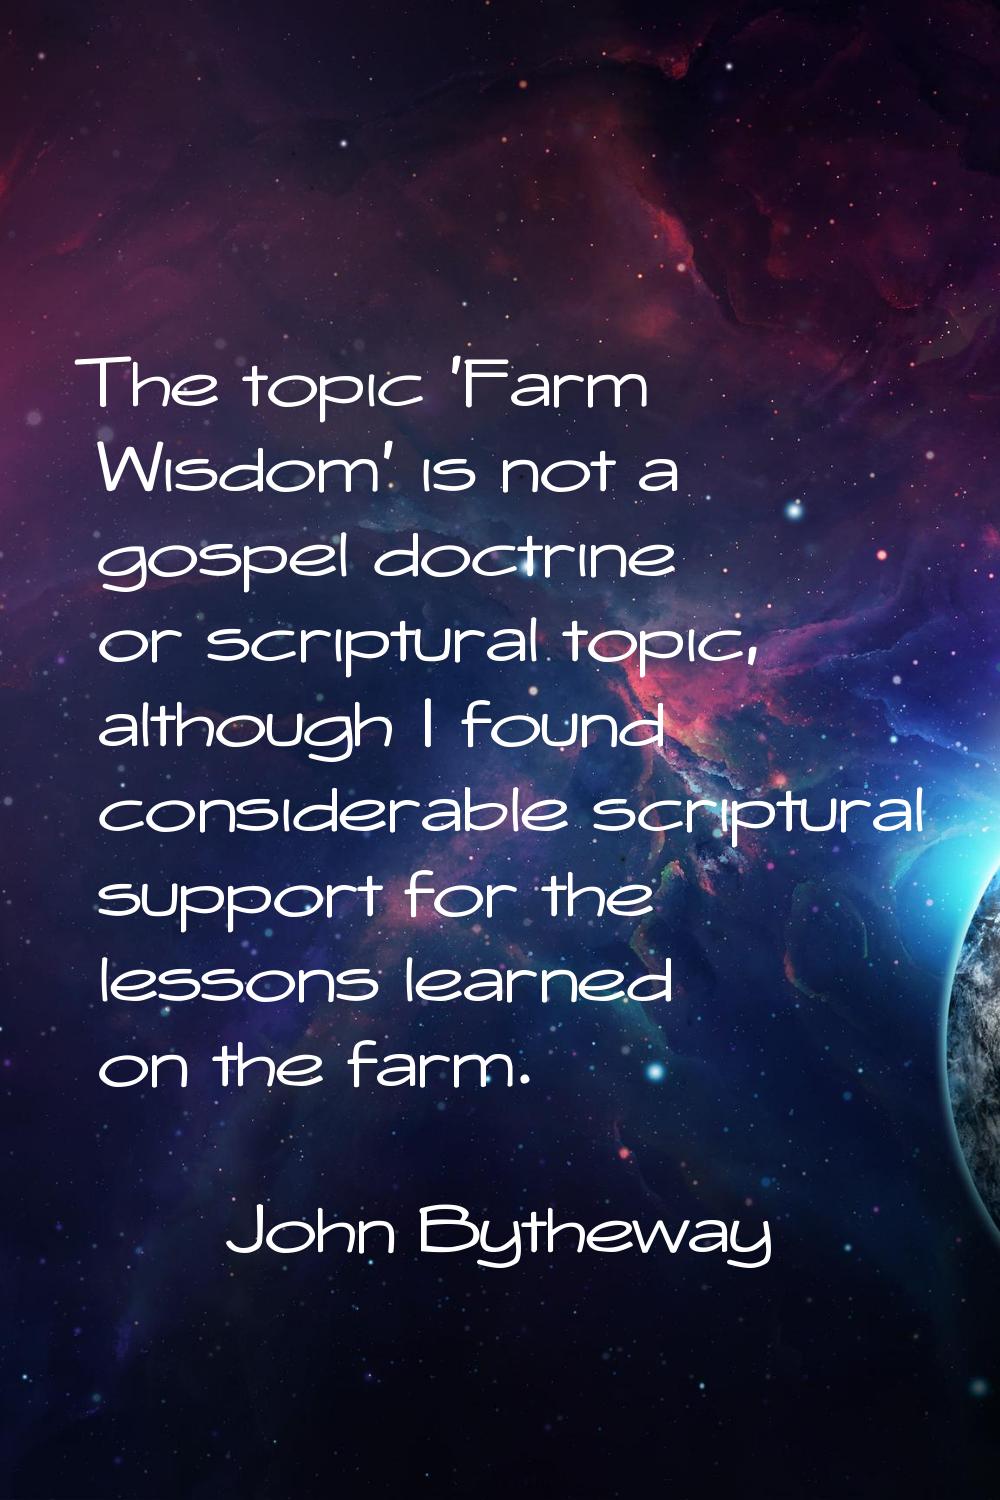 The topic 'Farm Wisdom' is not a gospel doctrine or scriptural topic, although I found considerable